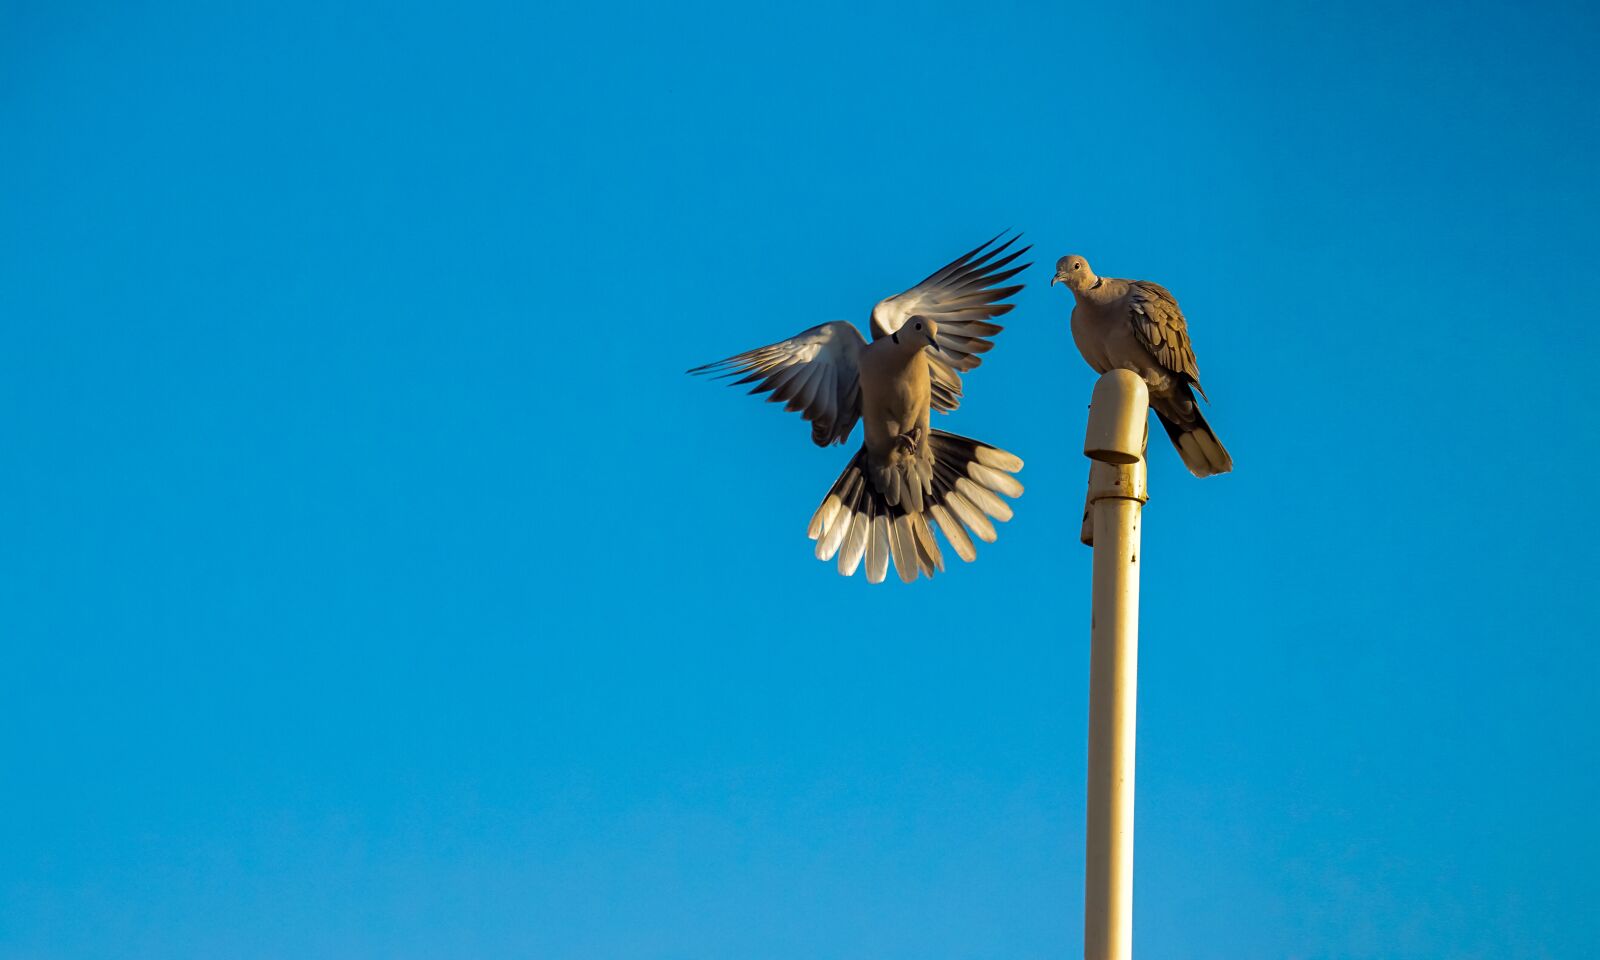 Sony a6000 sample photo. Flying pigeon, nature, feather photography